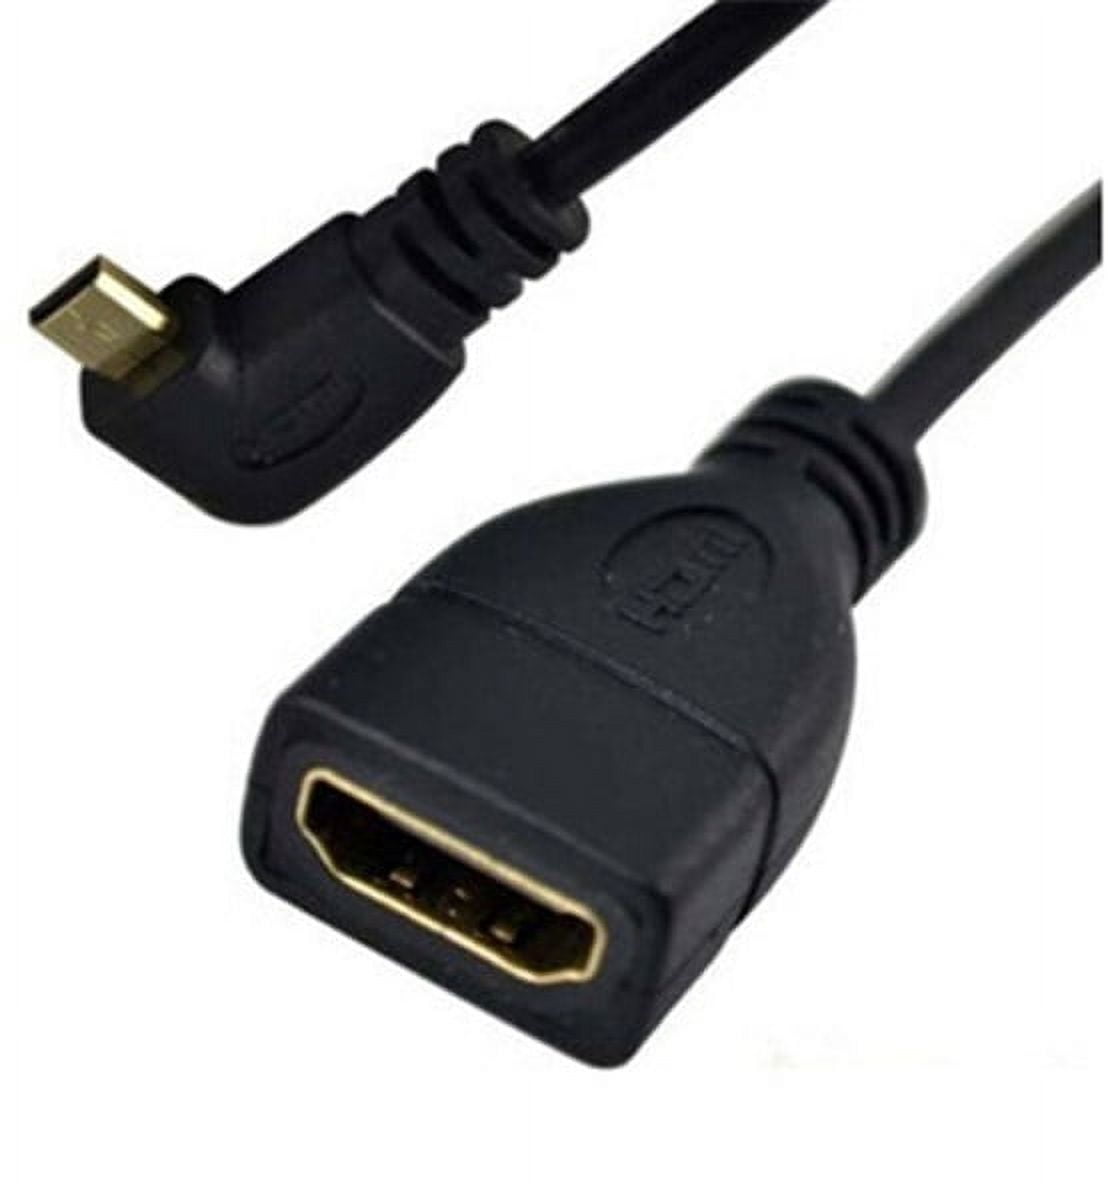 HTGuoji USB to HDMI Adapter Cable Cord - USB 2.0 Type A Male to